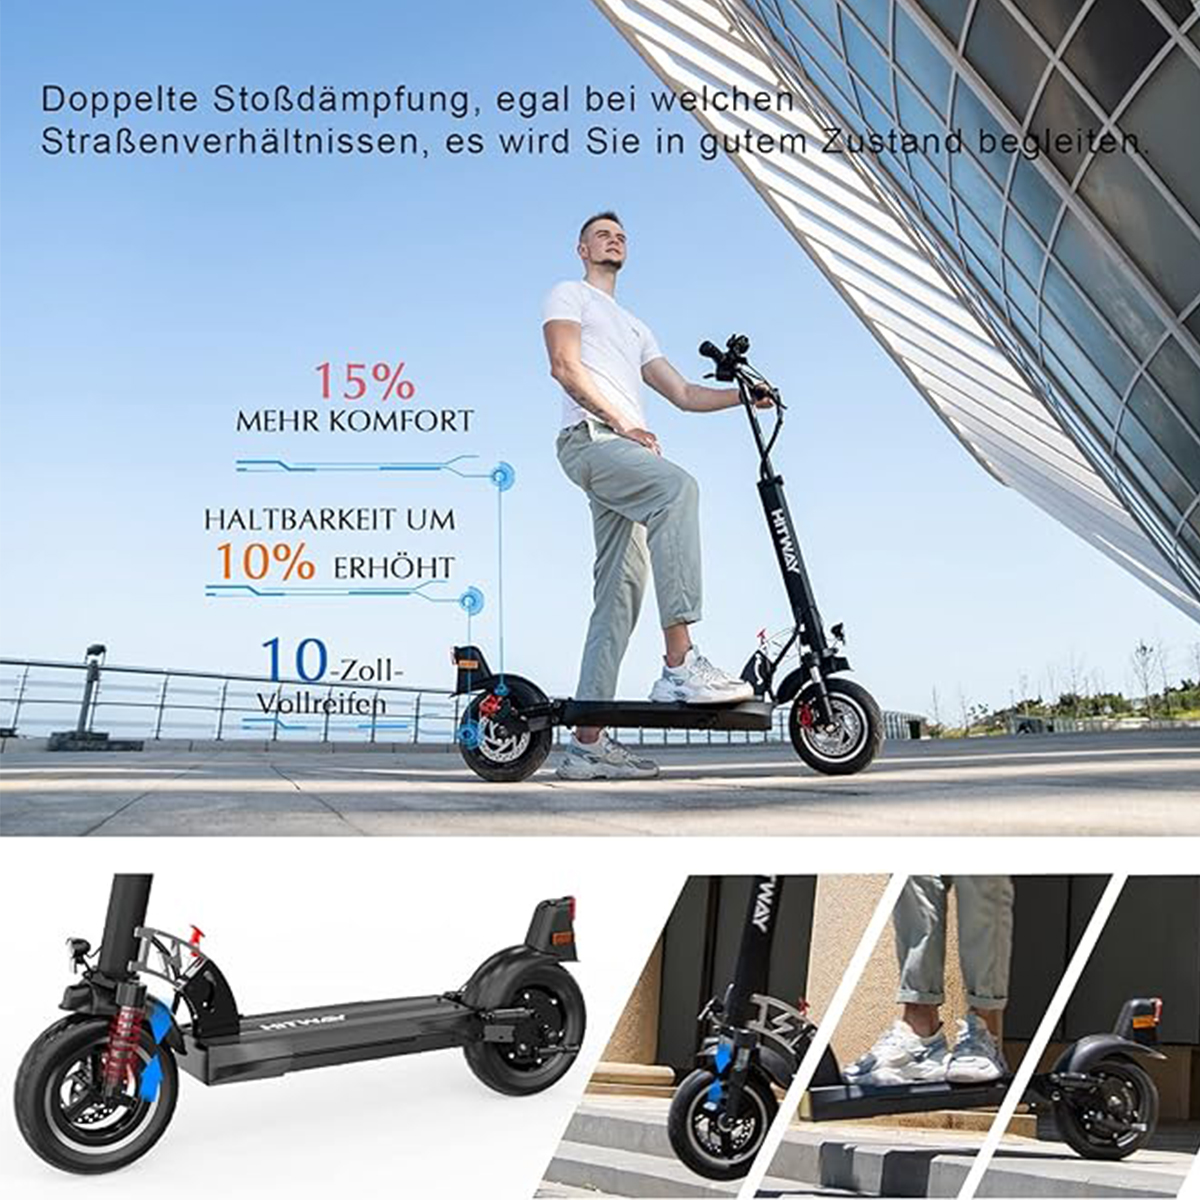 HITWAY H5 Electric Scooter E (10 mit Zoll, schwarz) Scooter E-Scooter ABE Straßenzulassung